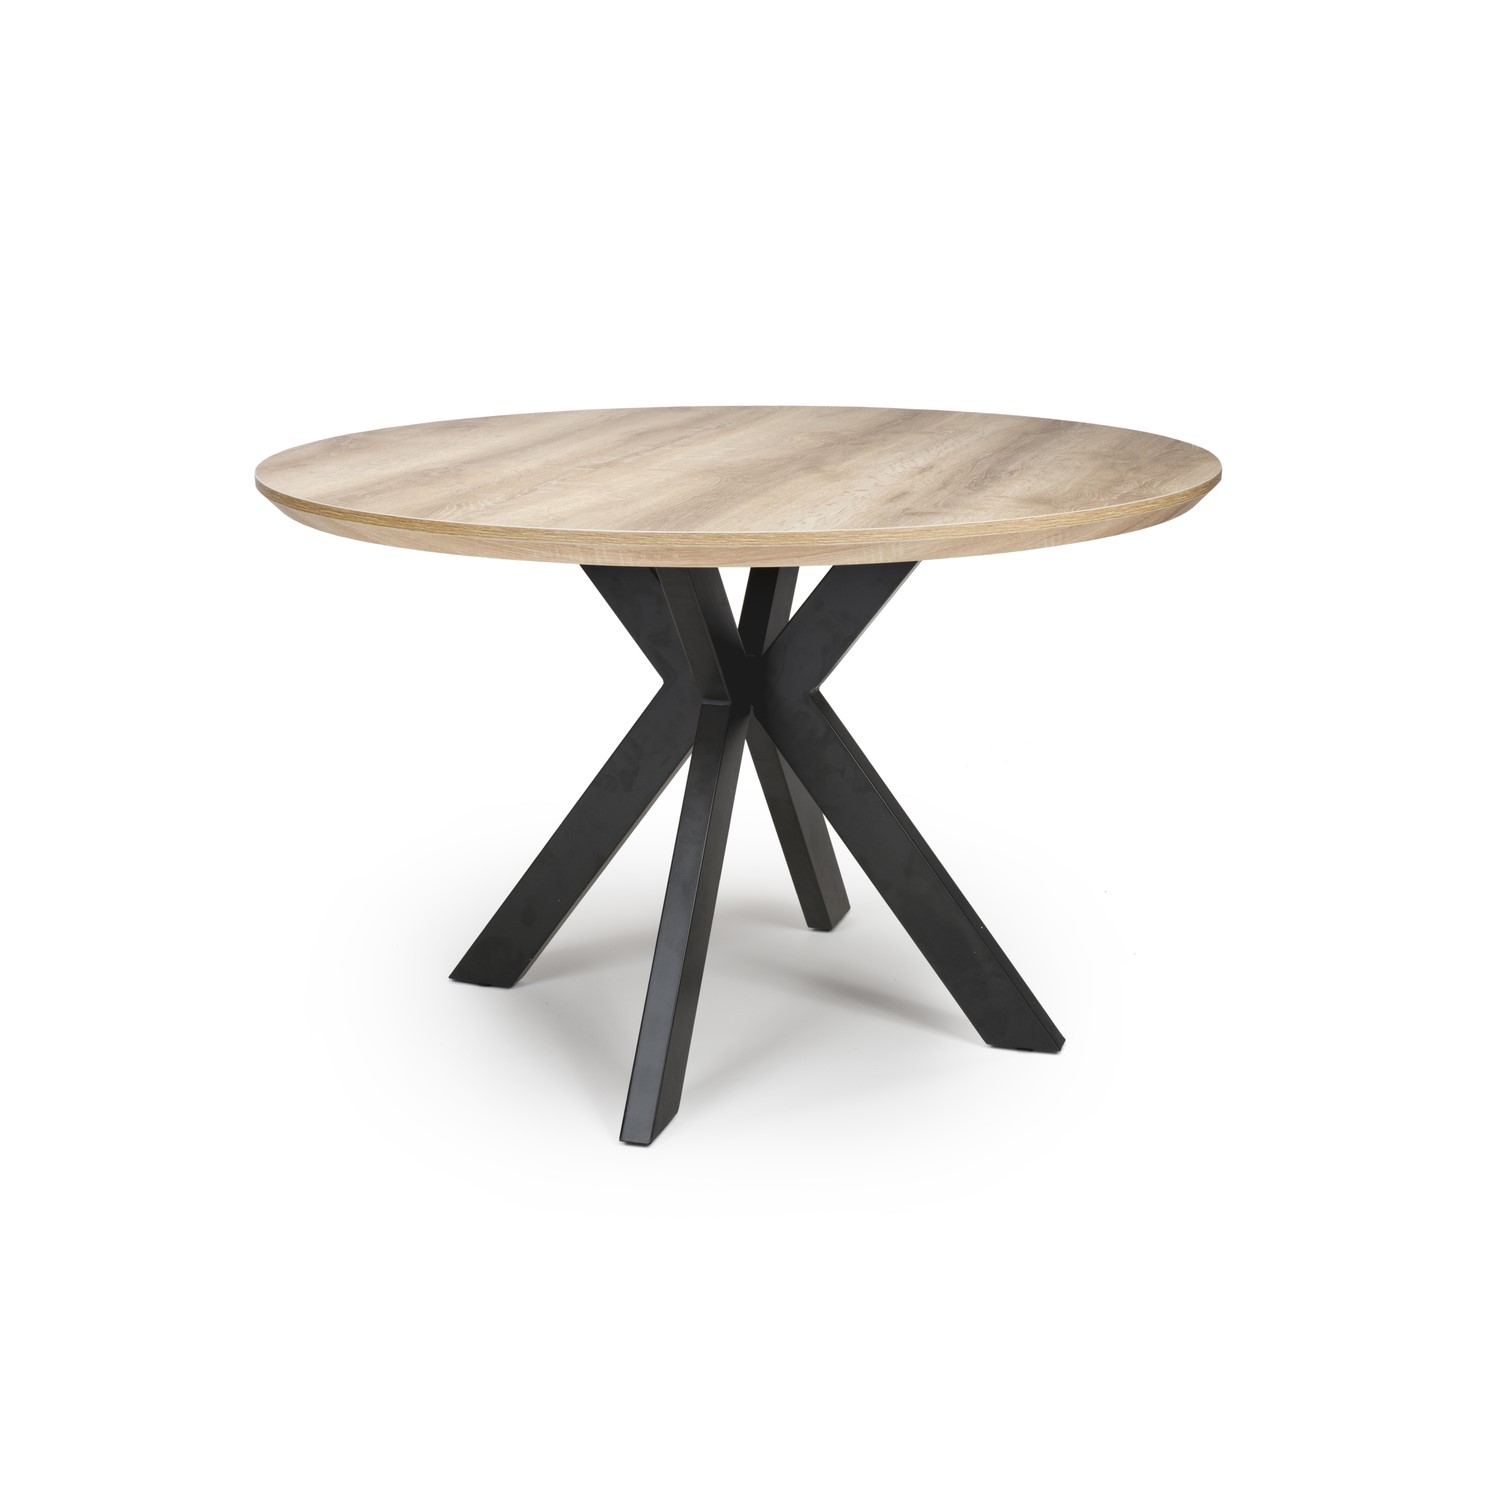 Photo of Round oak dining table - liberty